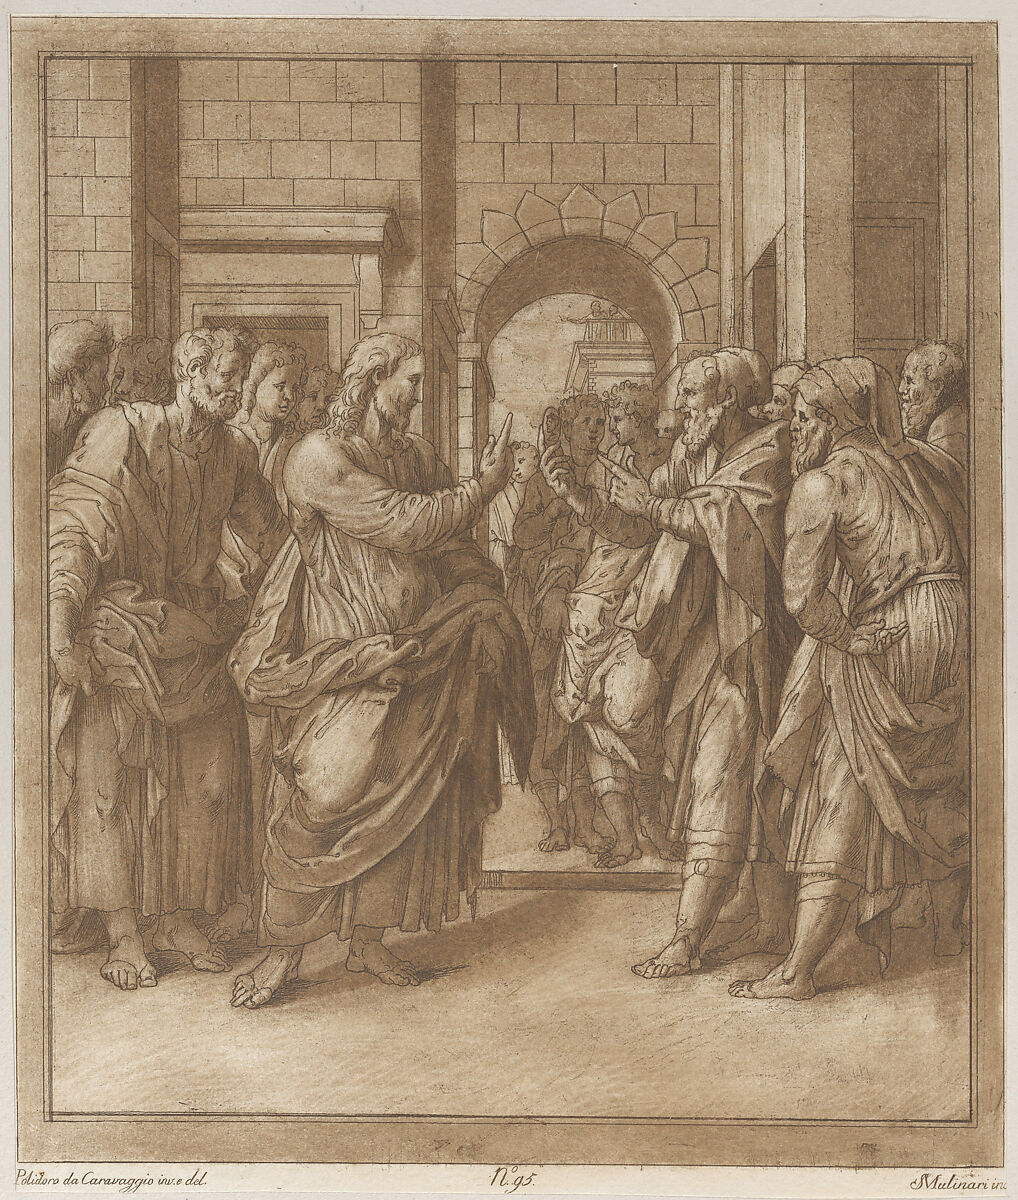 Christ standing before an entrance to a city surrounded by apostles addressing a group of men at right, Stefano Mulinari (Italian, Florence ca. 1741–90), Etching with sulphur tone printed in brown 